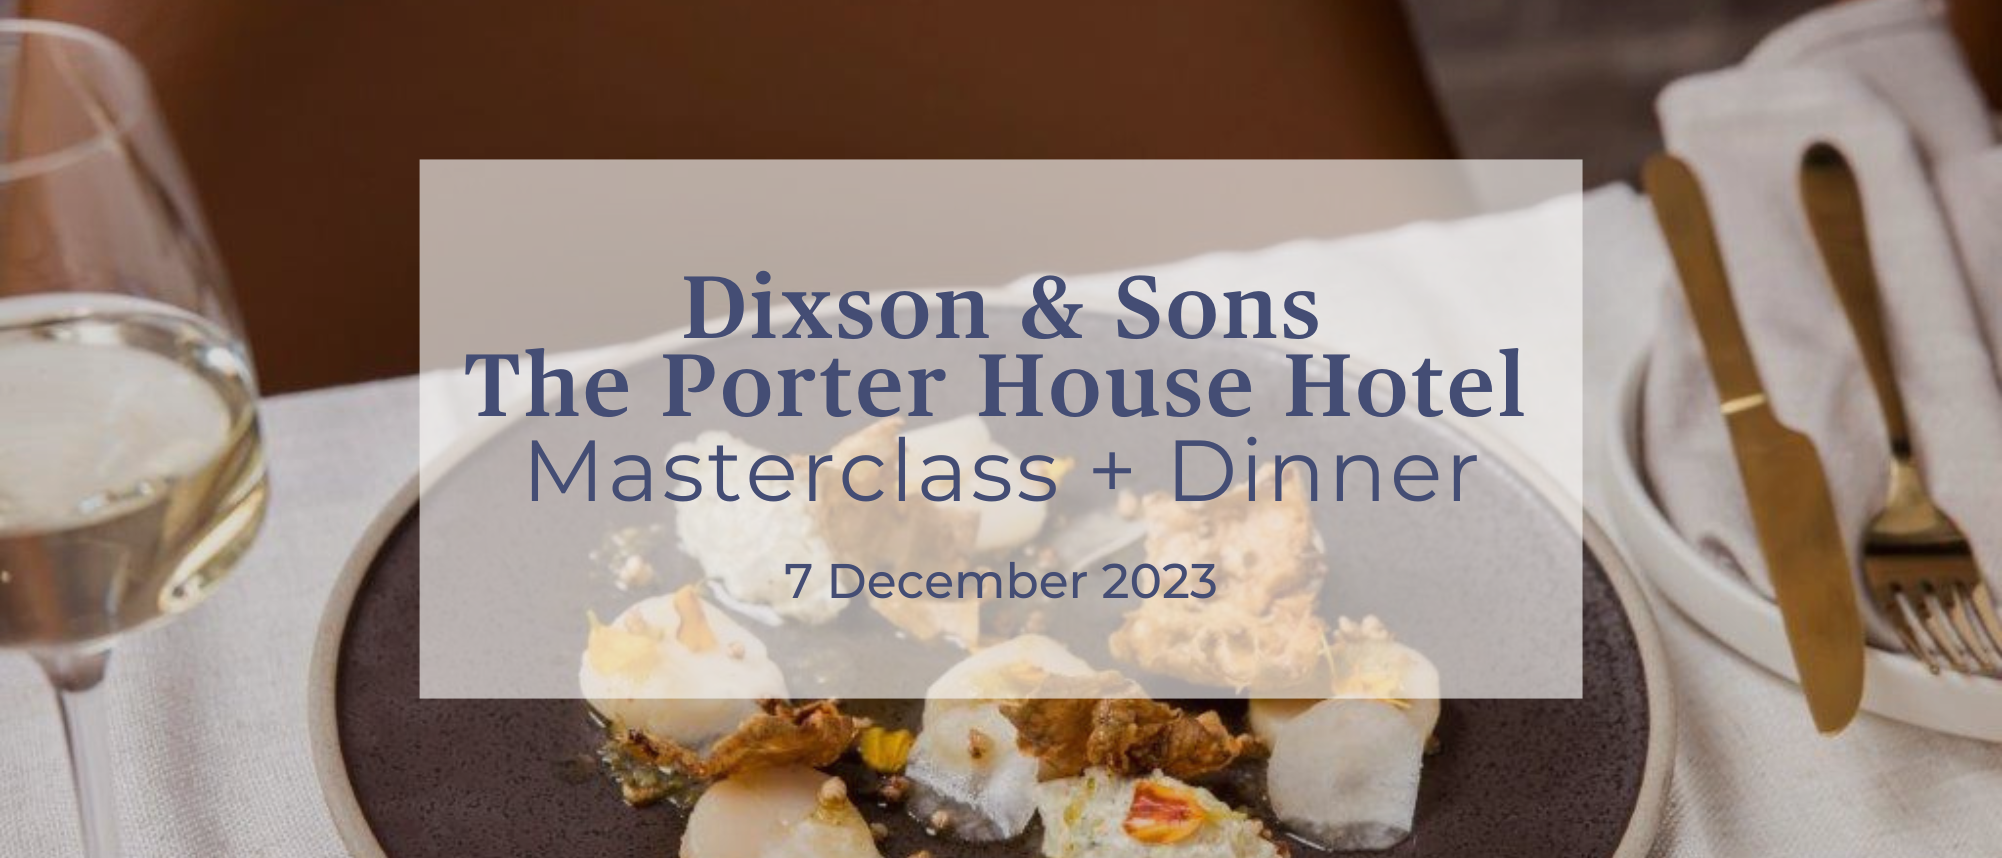 Dixson & Sons at The Porter House Hotel Masterclass + Dinner